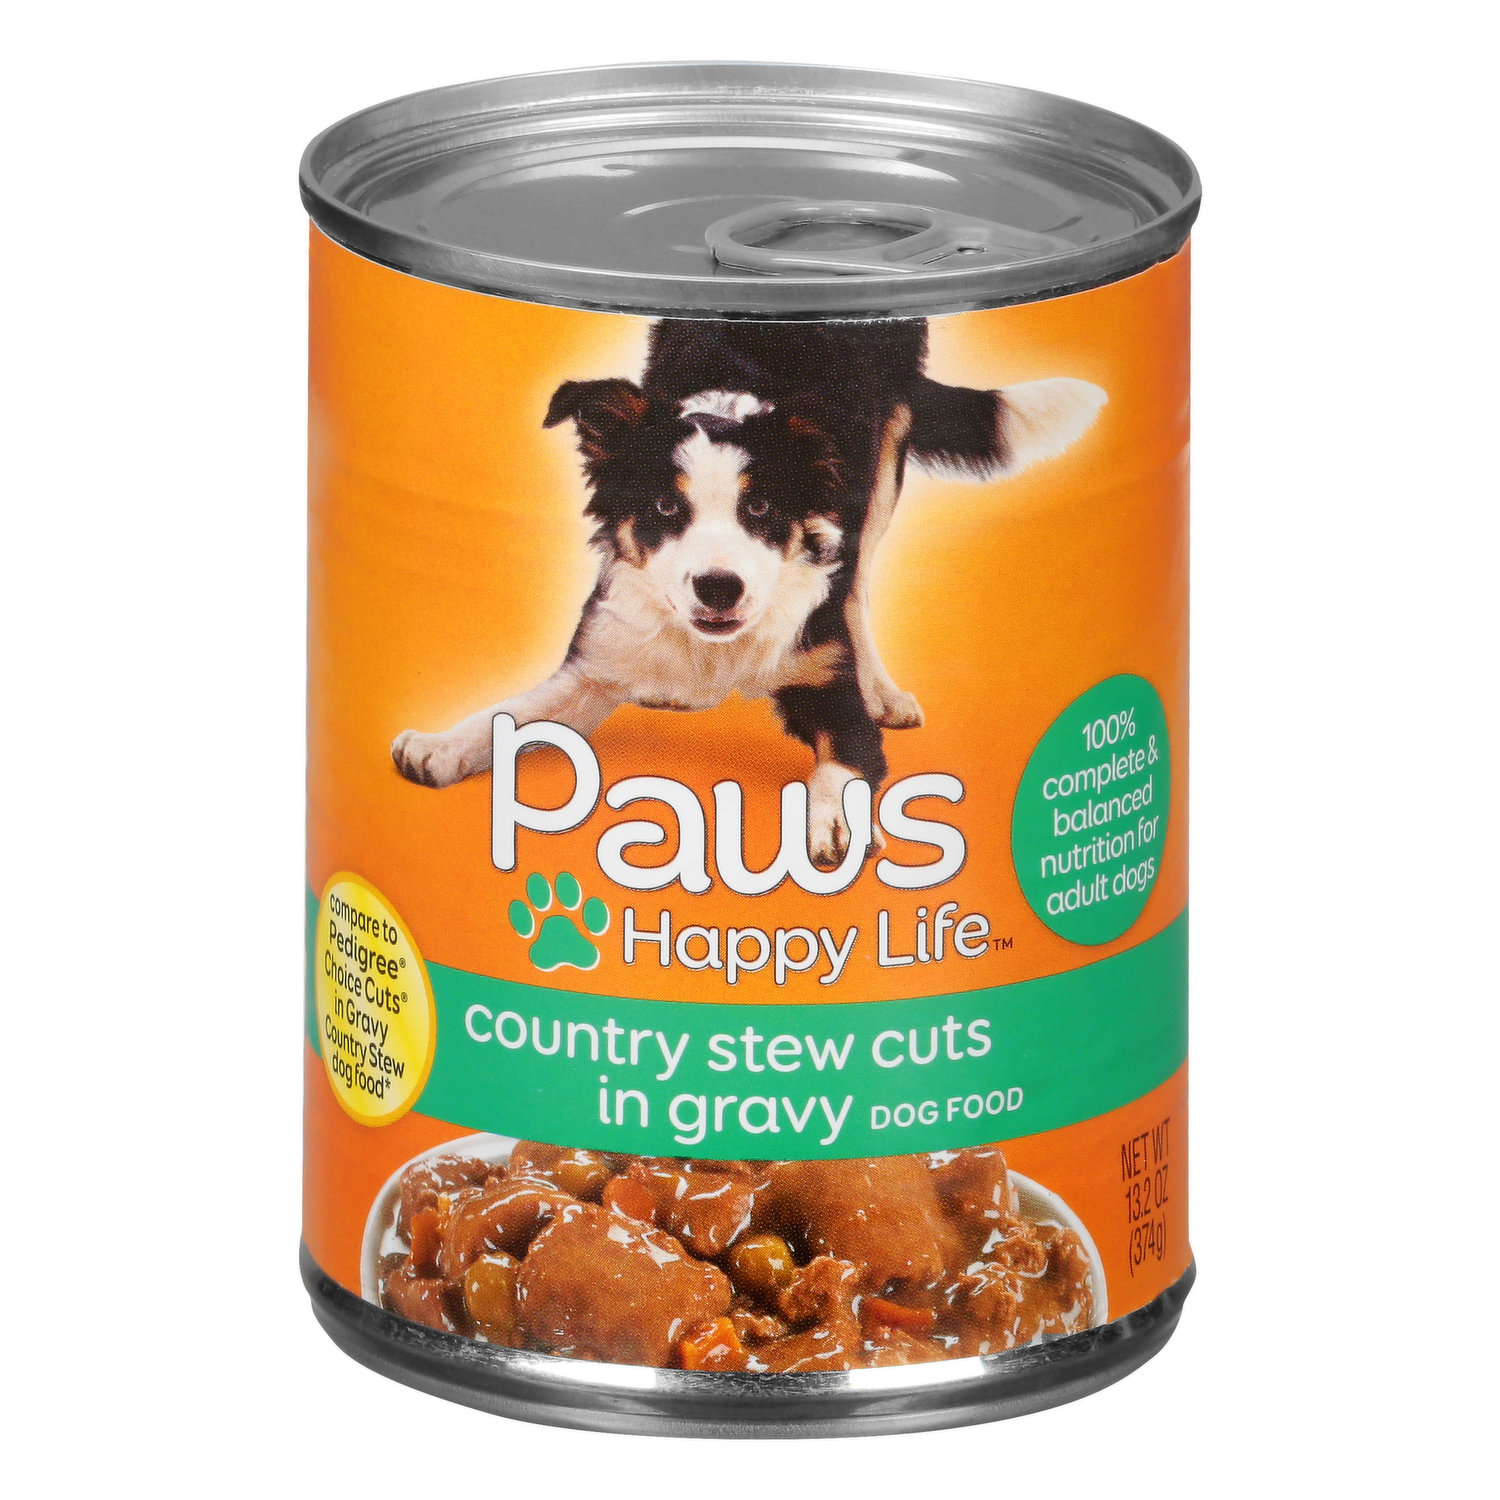 Paws Happy Life Dog Food, Country Stew Cuts in Gravy - King Kullen